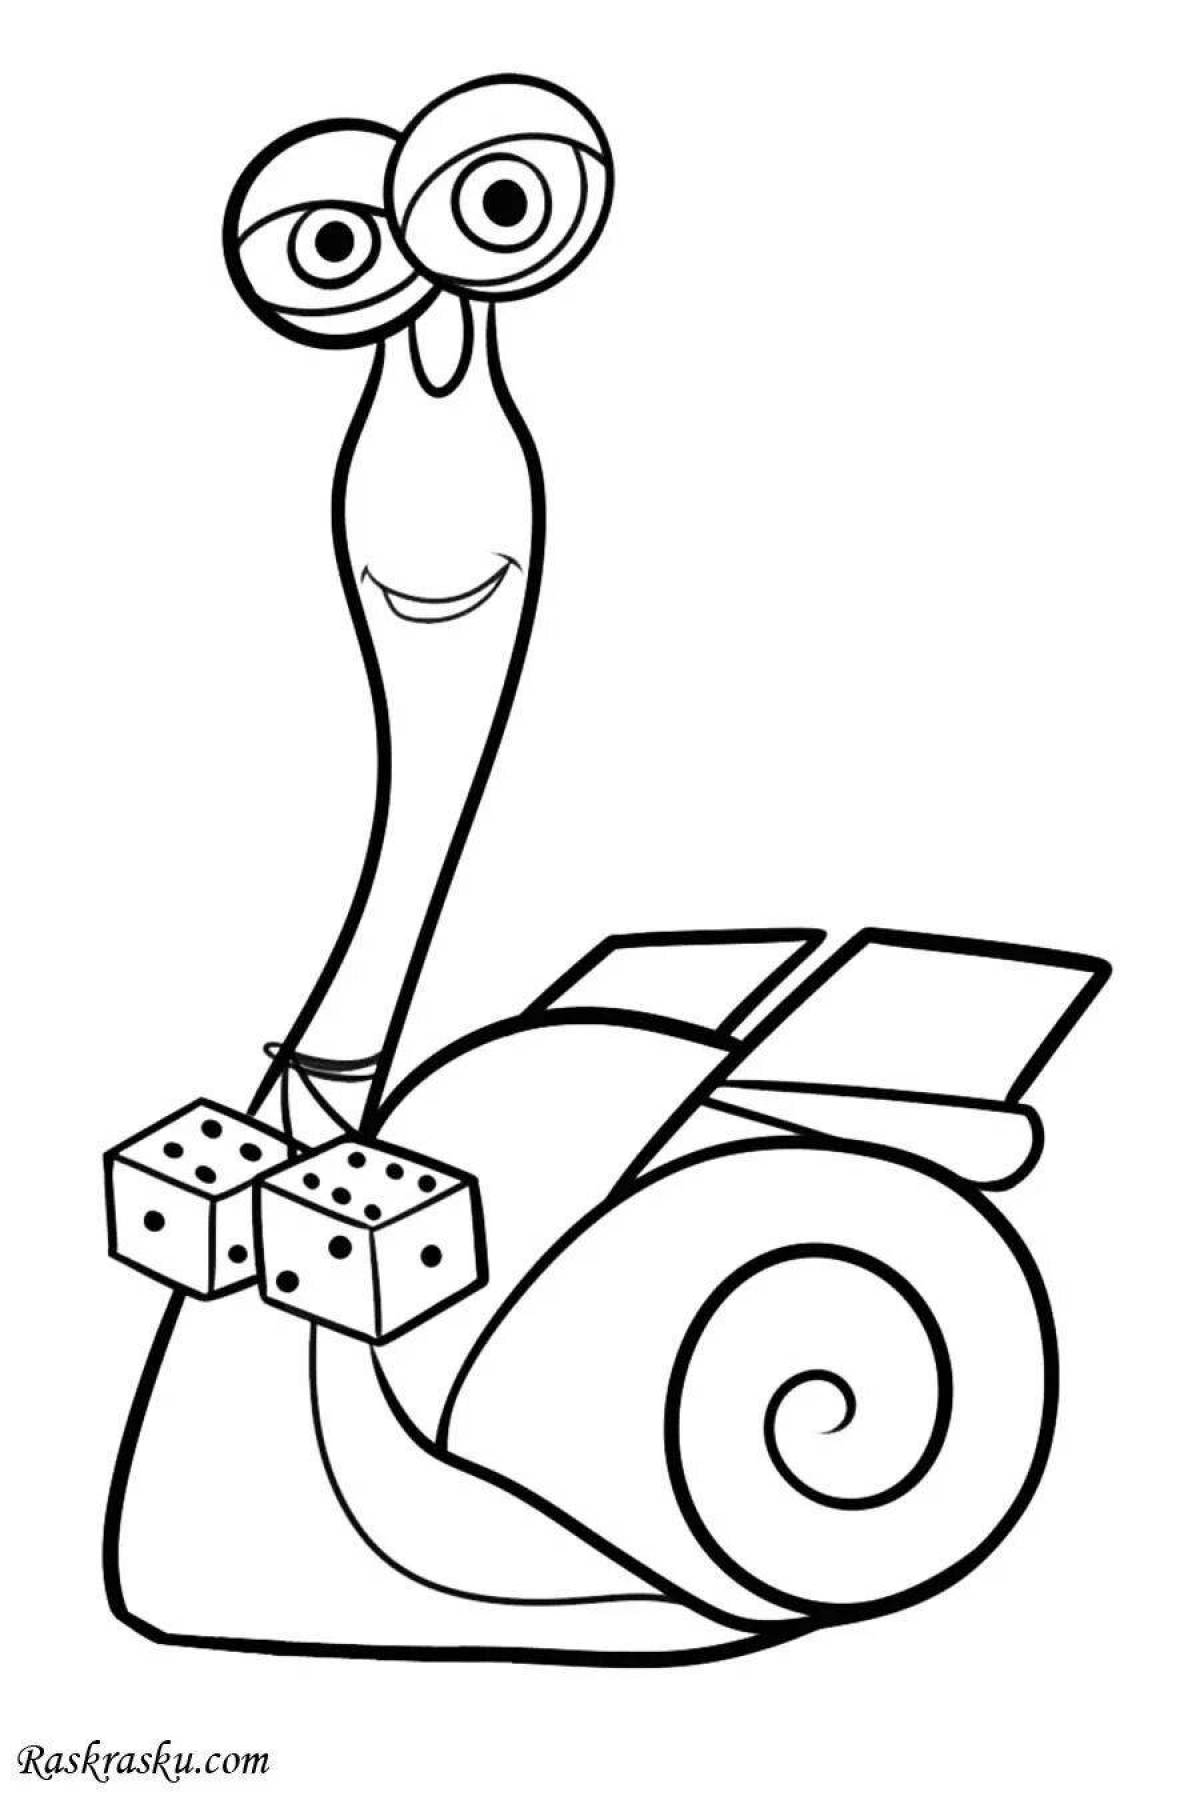 Bright turbo snail coloring book